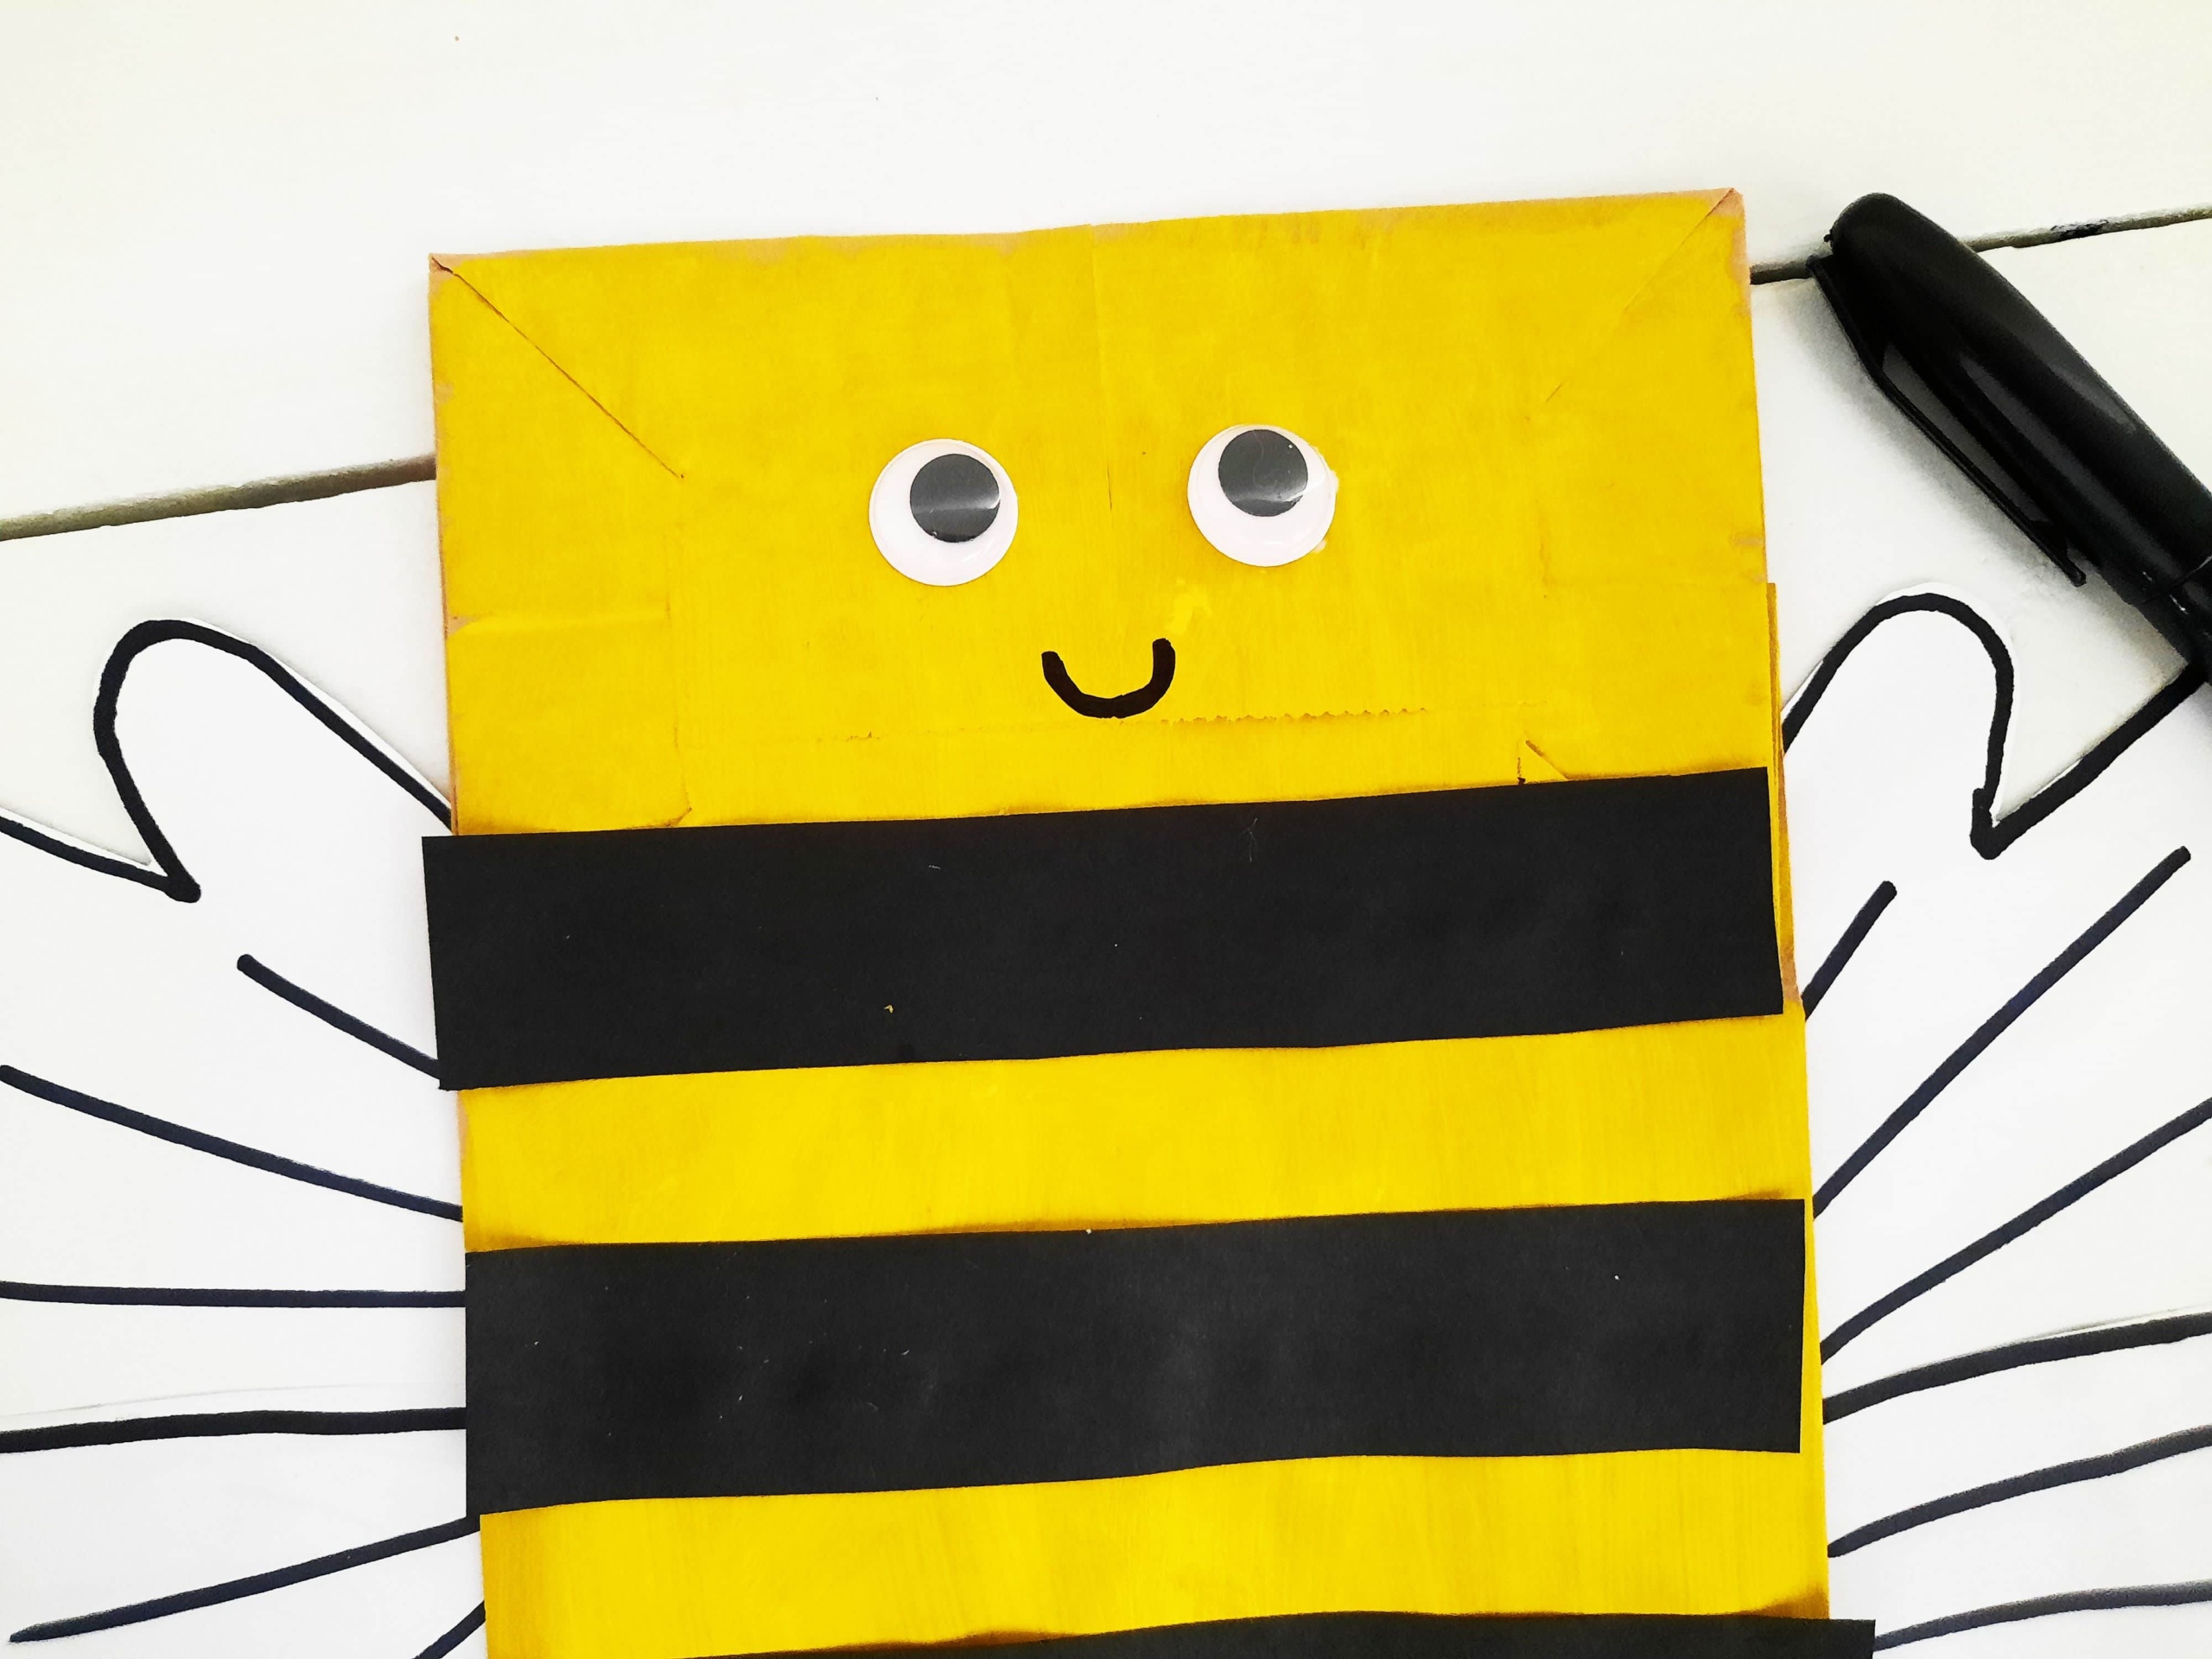 Add Googly Eyes and a Smiley Face to the Bee